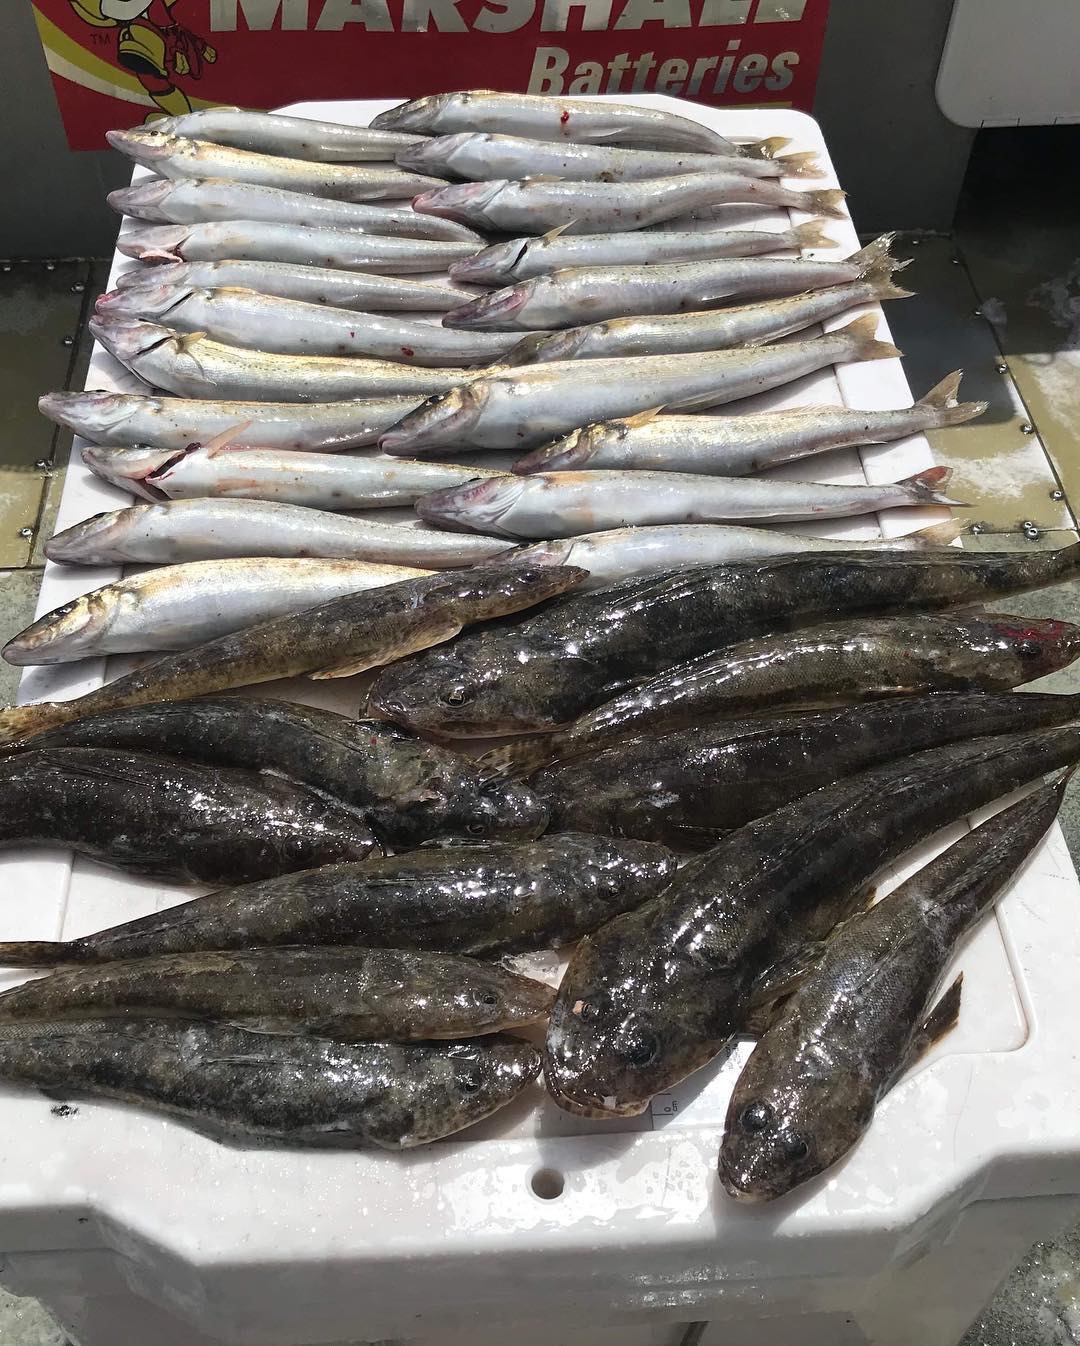 Flathead & Whiting Fishing in Melbourne